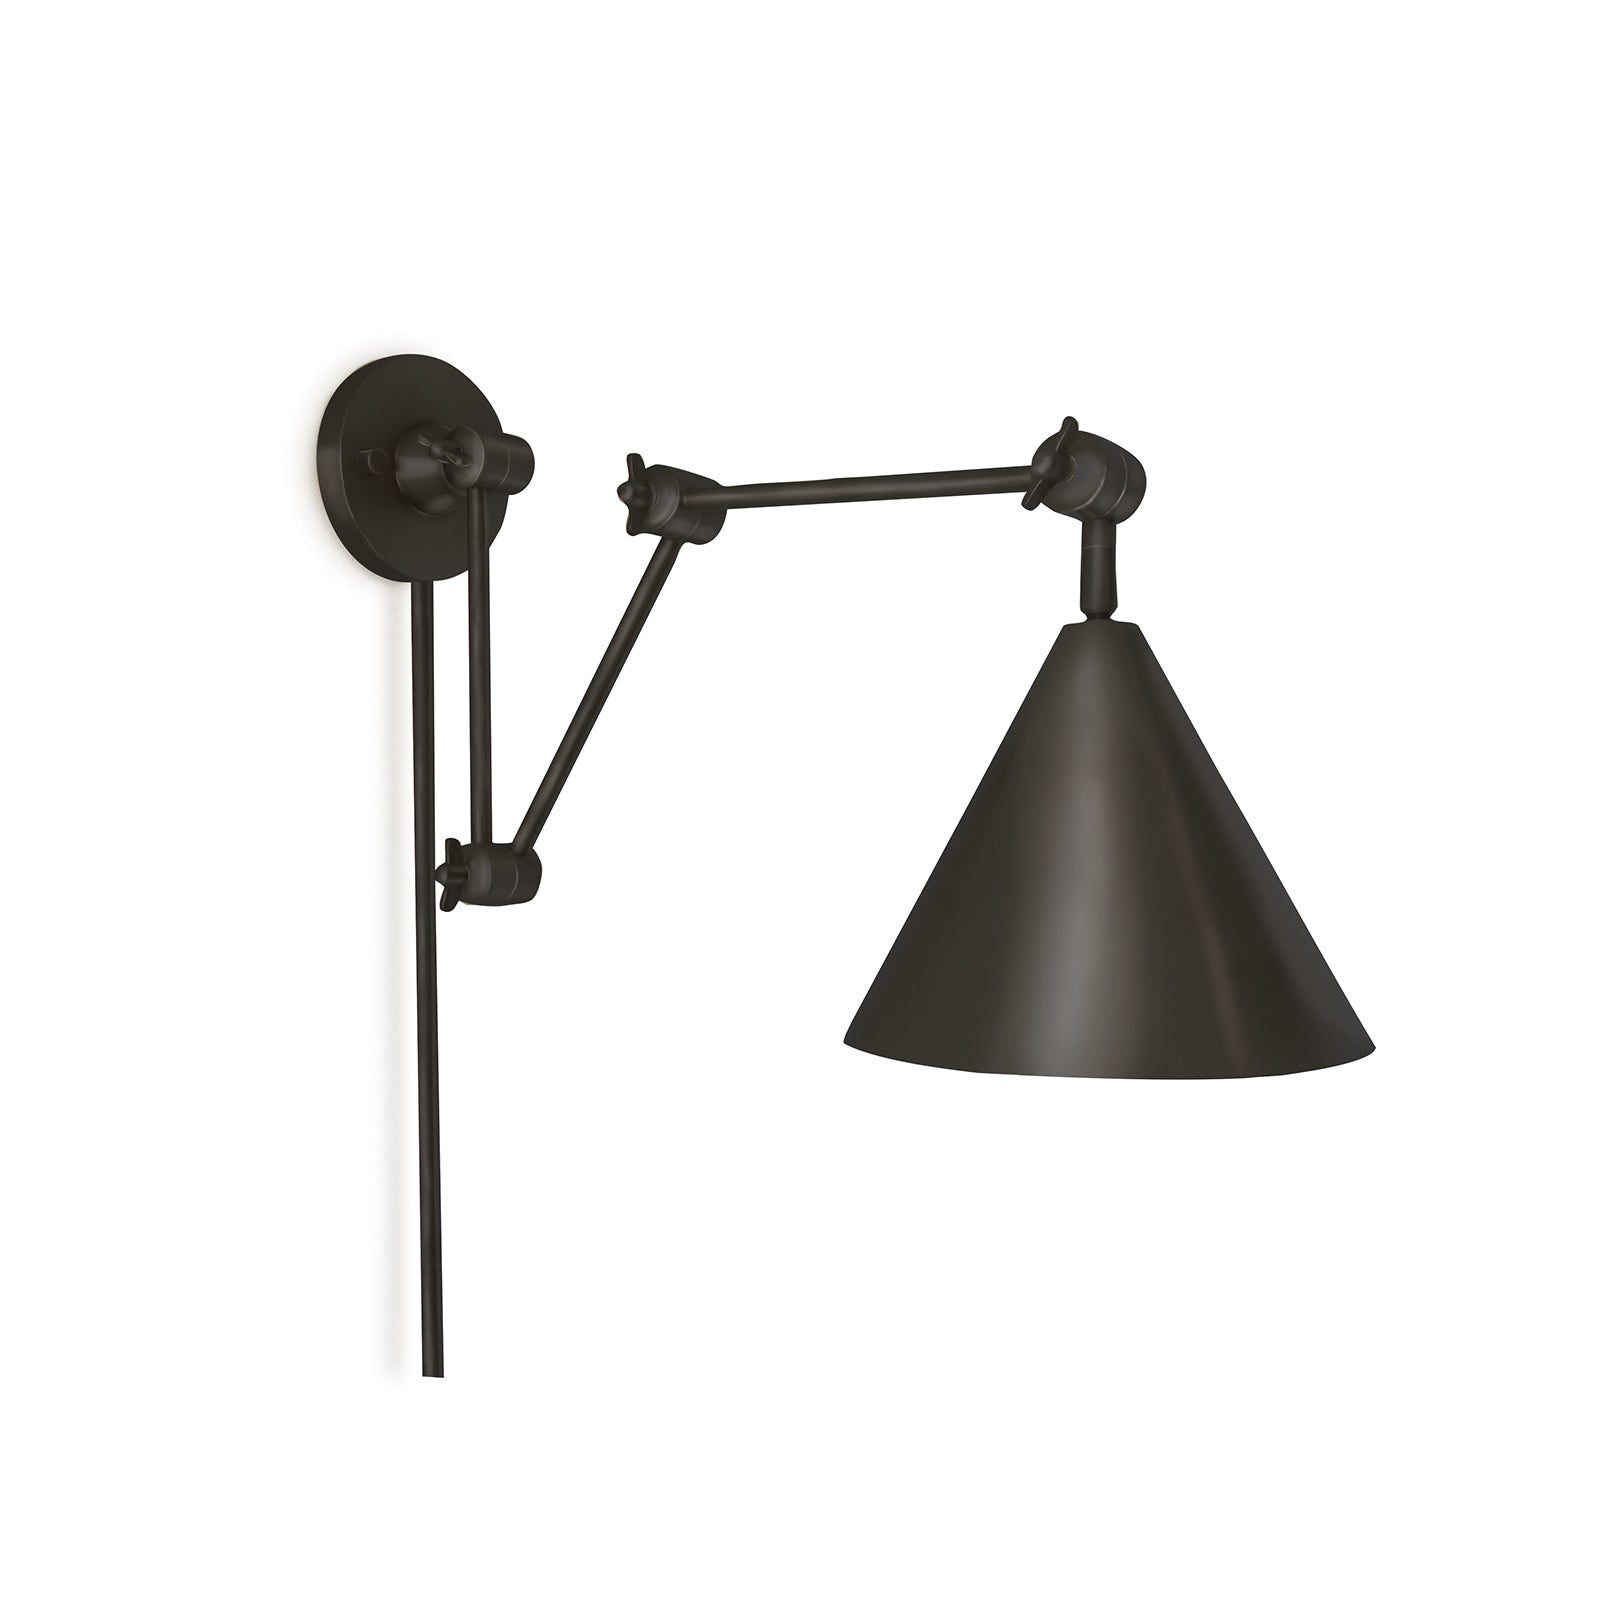 Zig-Zag Task Sconce in Oil Rubbed Bronze by Coastal Living